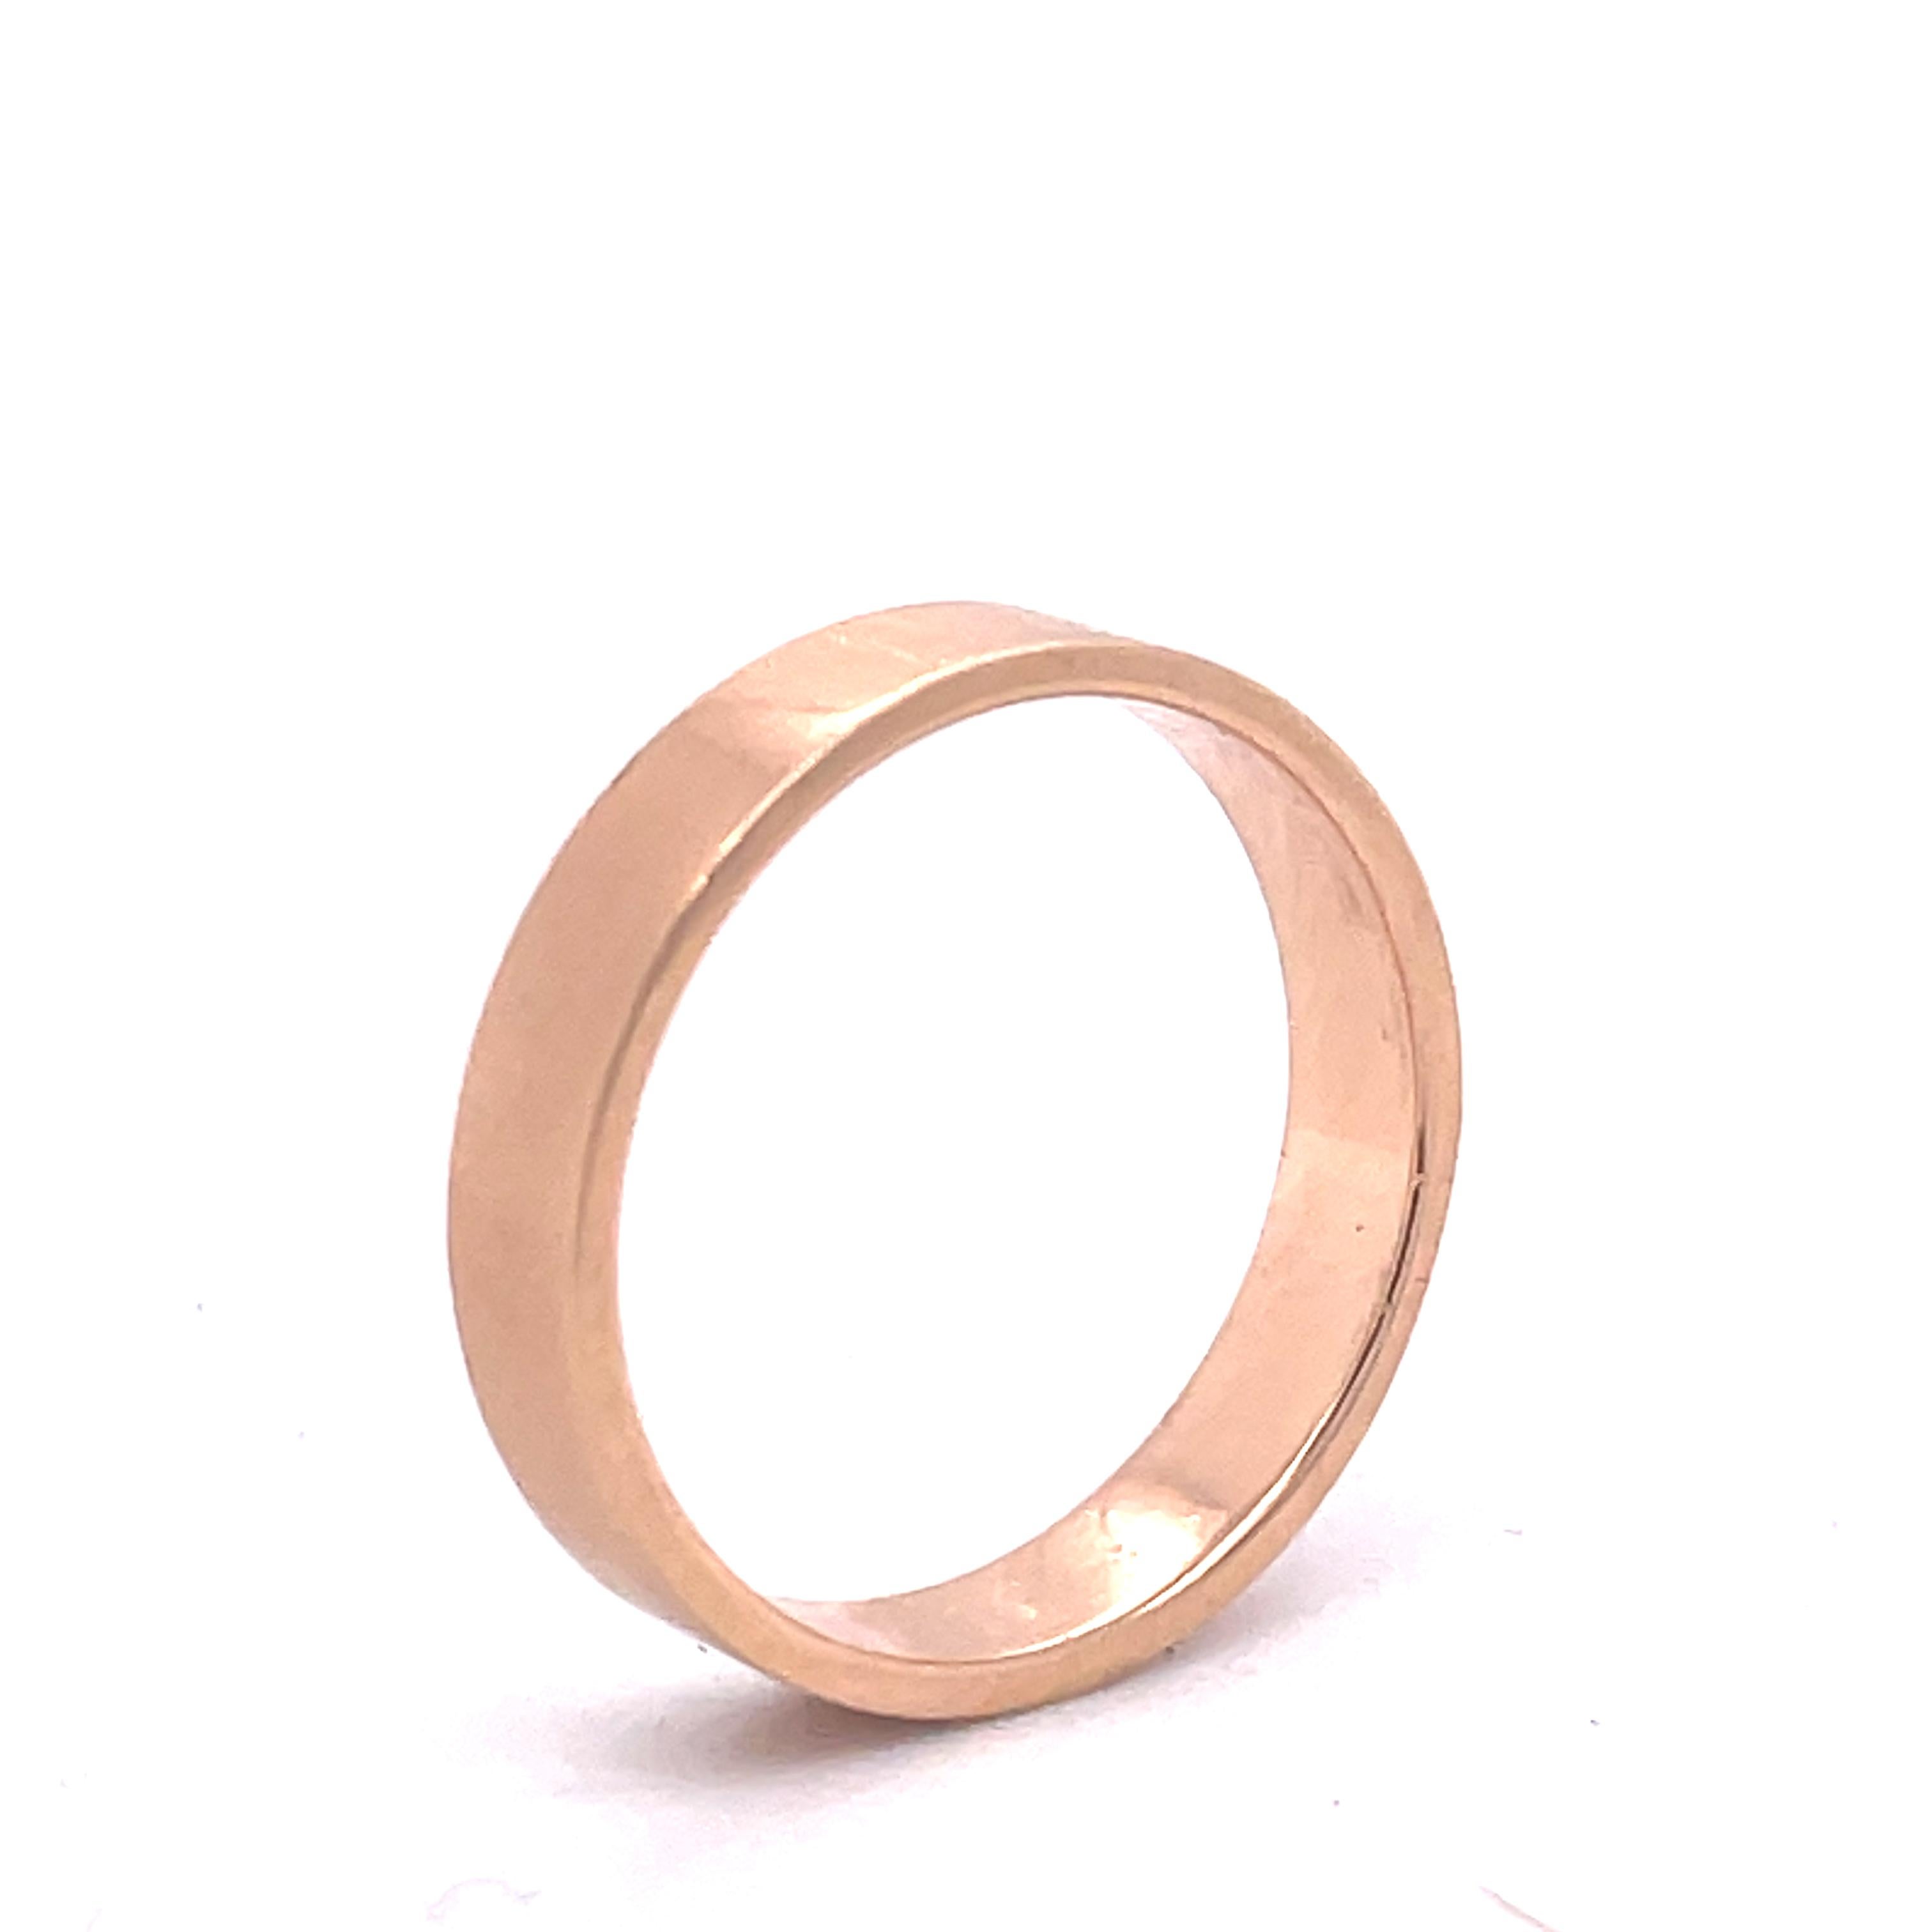 Jewelry Material: Pink Gold 14k (the gold has been tested by a professional) -

 Matte finish

Total Metal Weight: 3.48g

Size:7 US

Condition: NEW


Feel free to contact us for inquiries and consultation and special requests.
The item will be